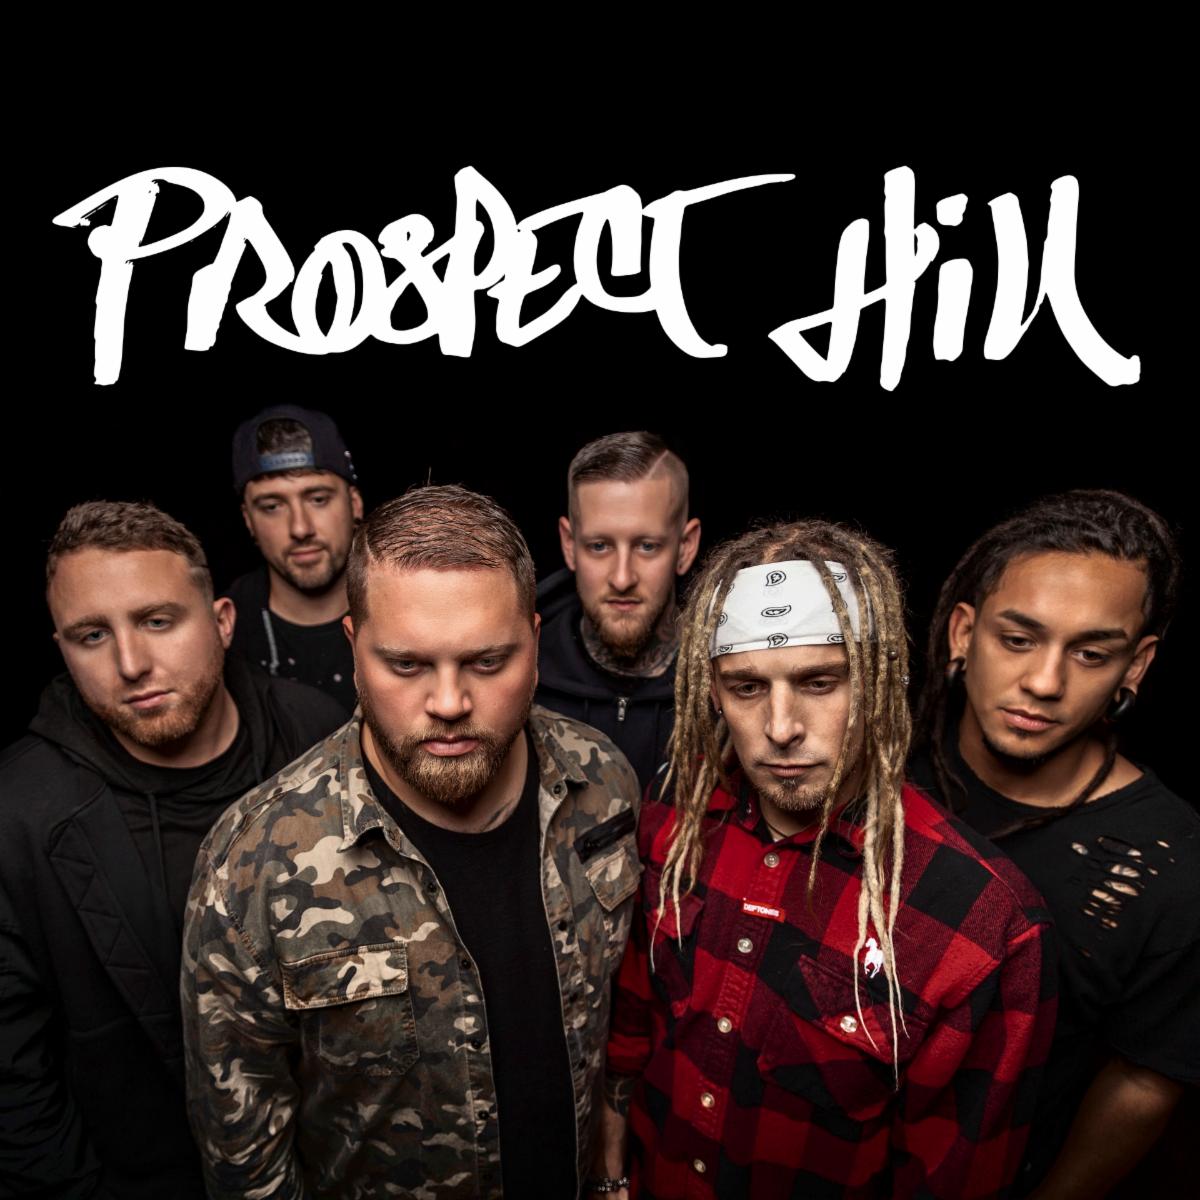 Prospect Hill Releases "Celebrate" - A Single Written for Our Times!